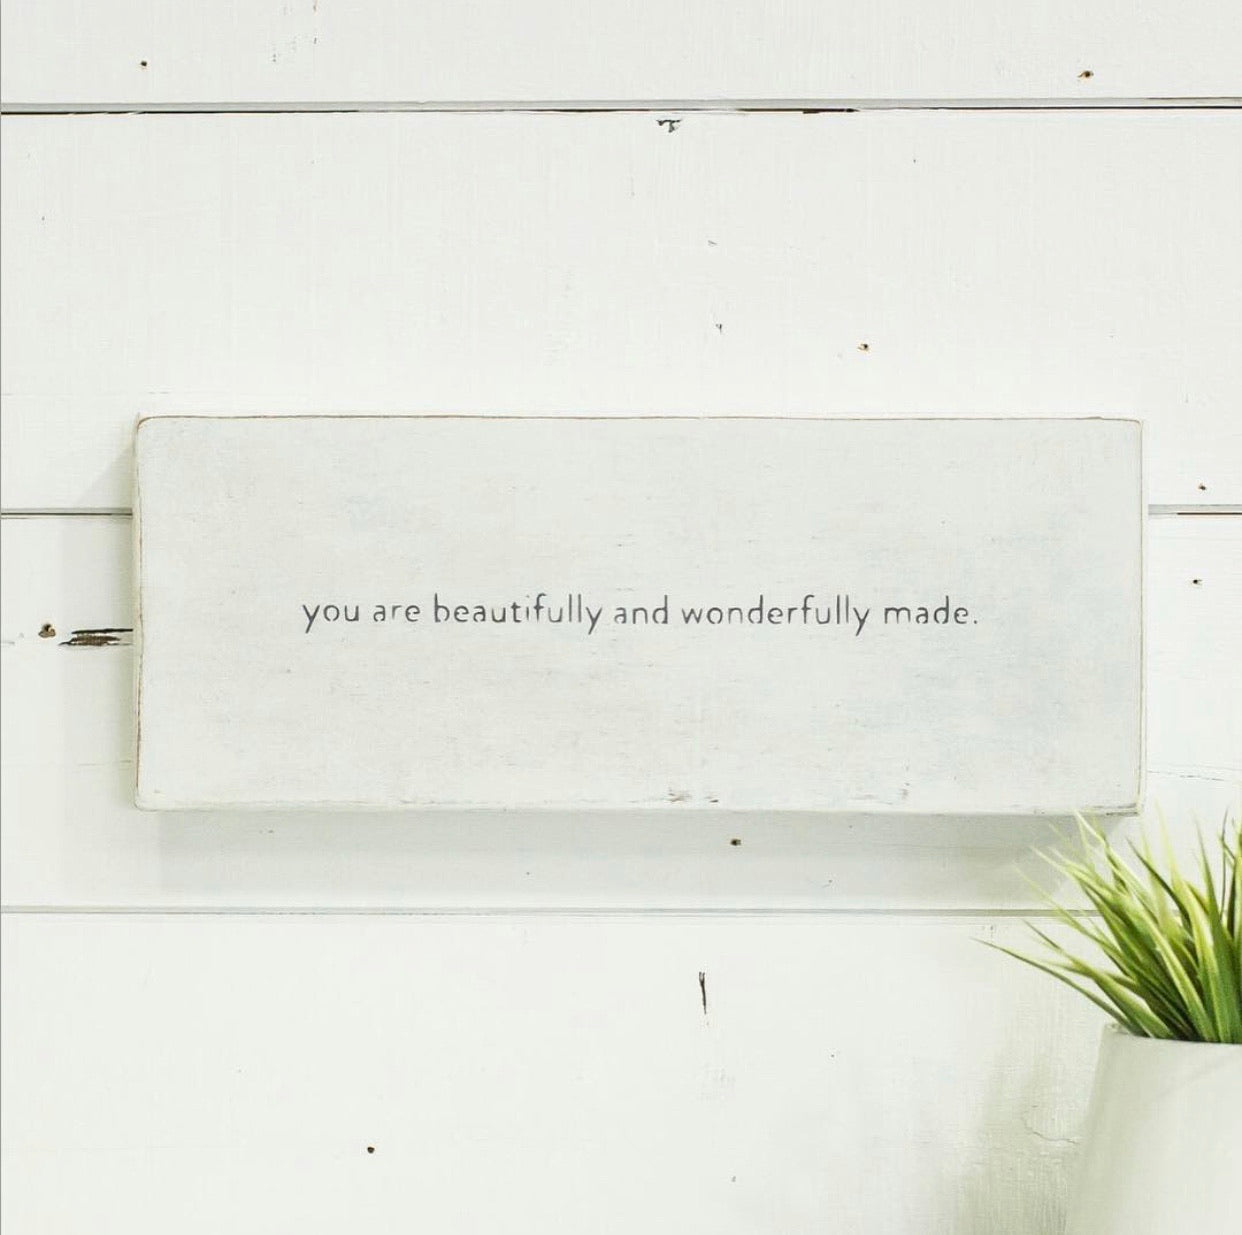 Wooden Wall Art "you are beautifully and wonderfully made."